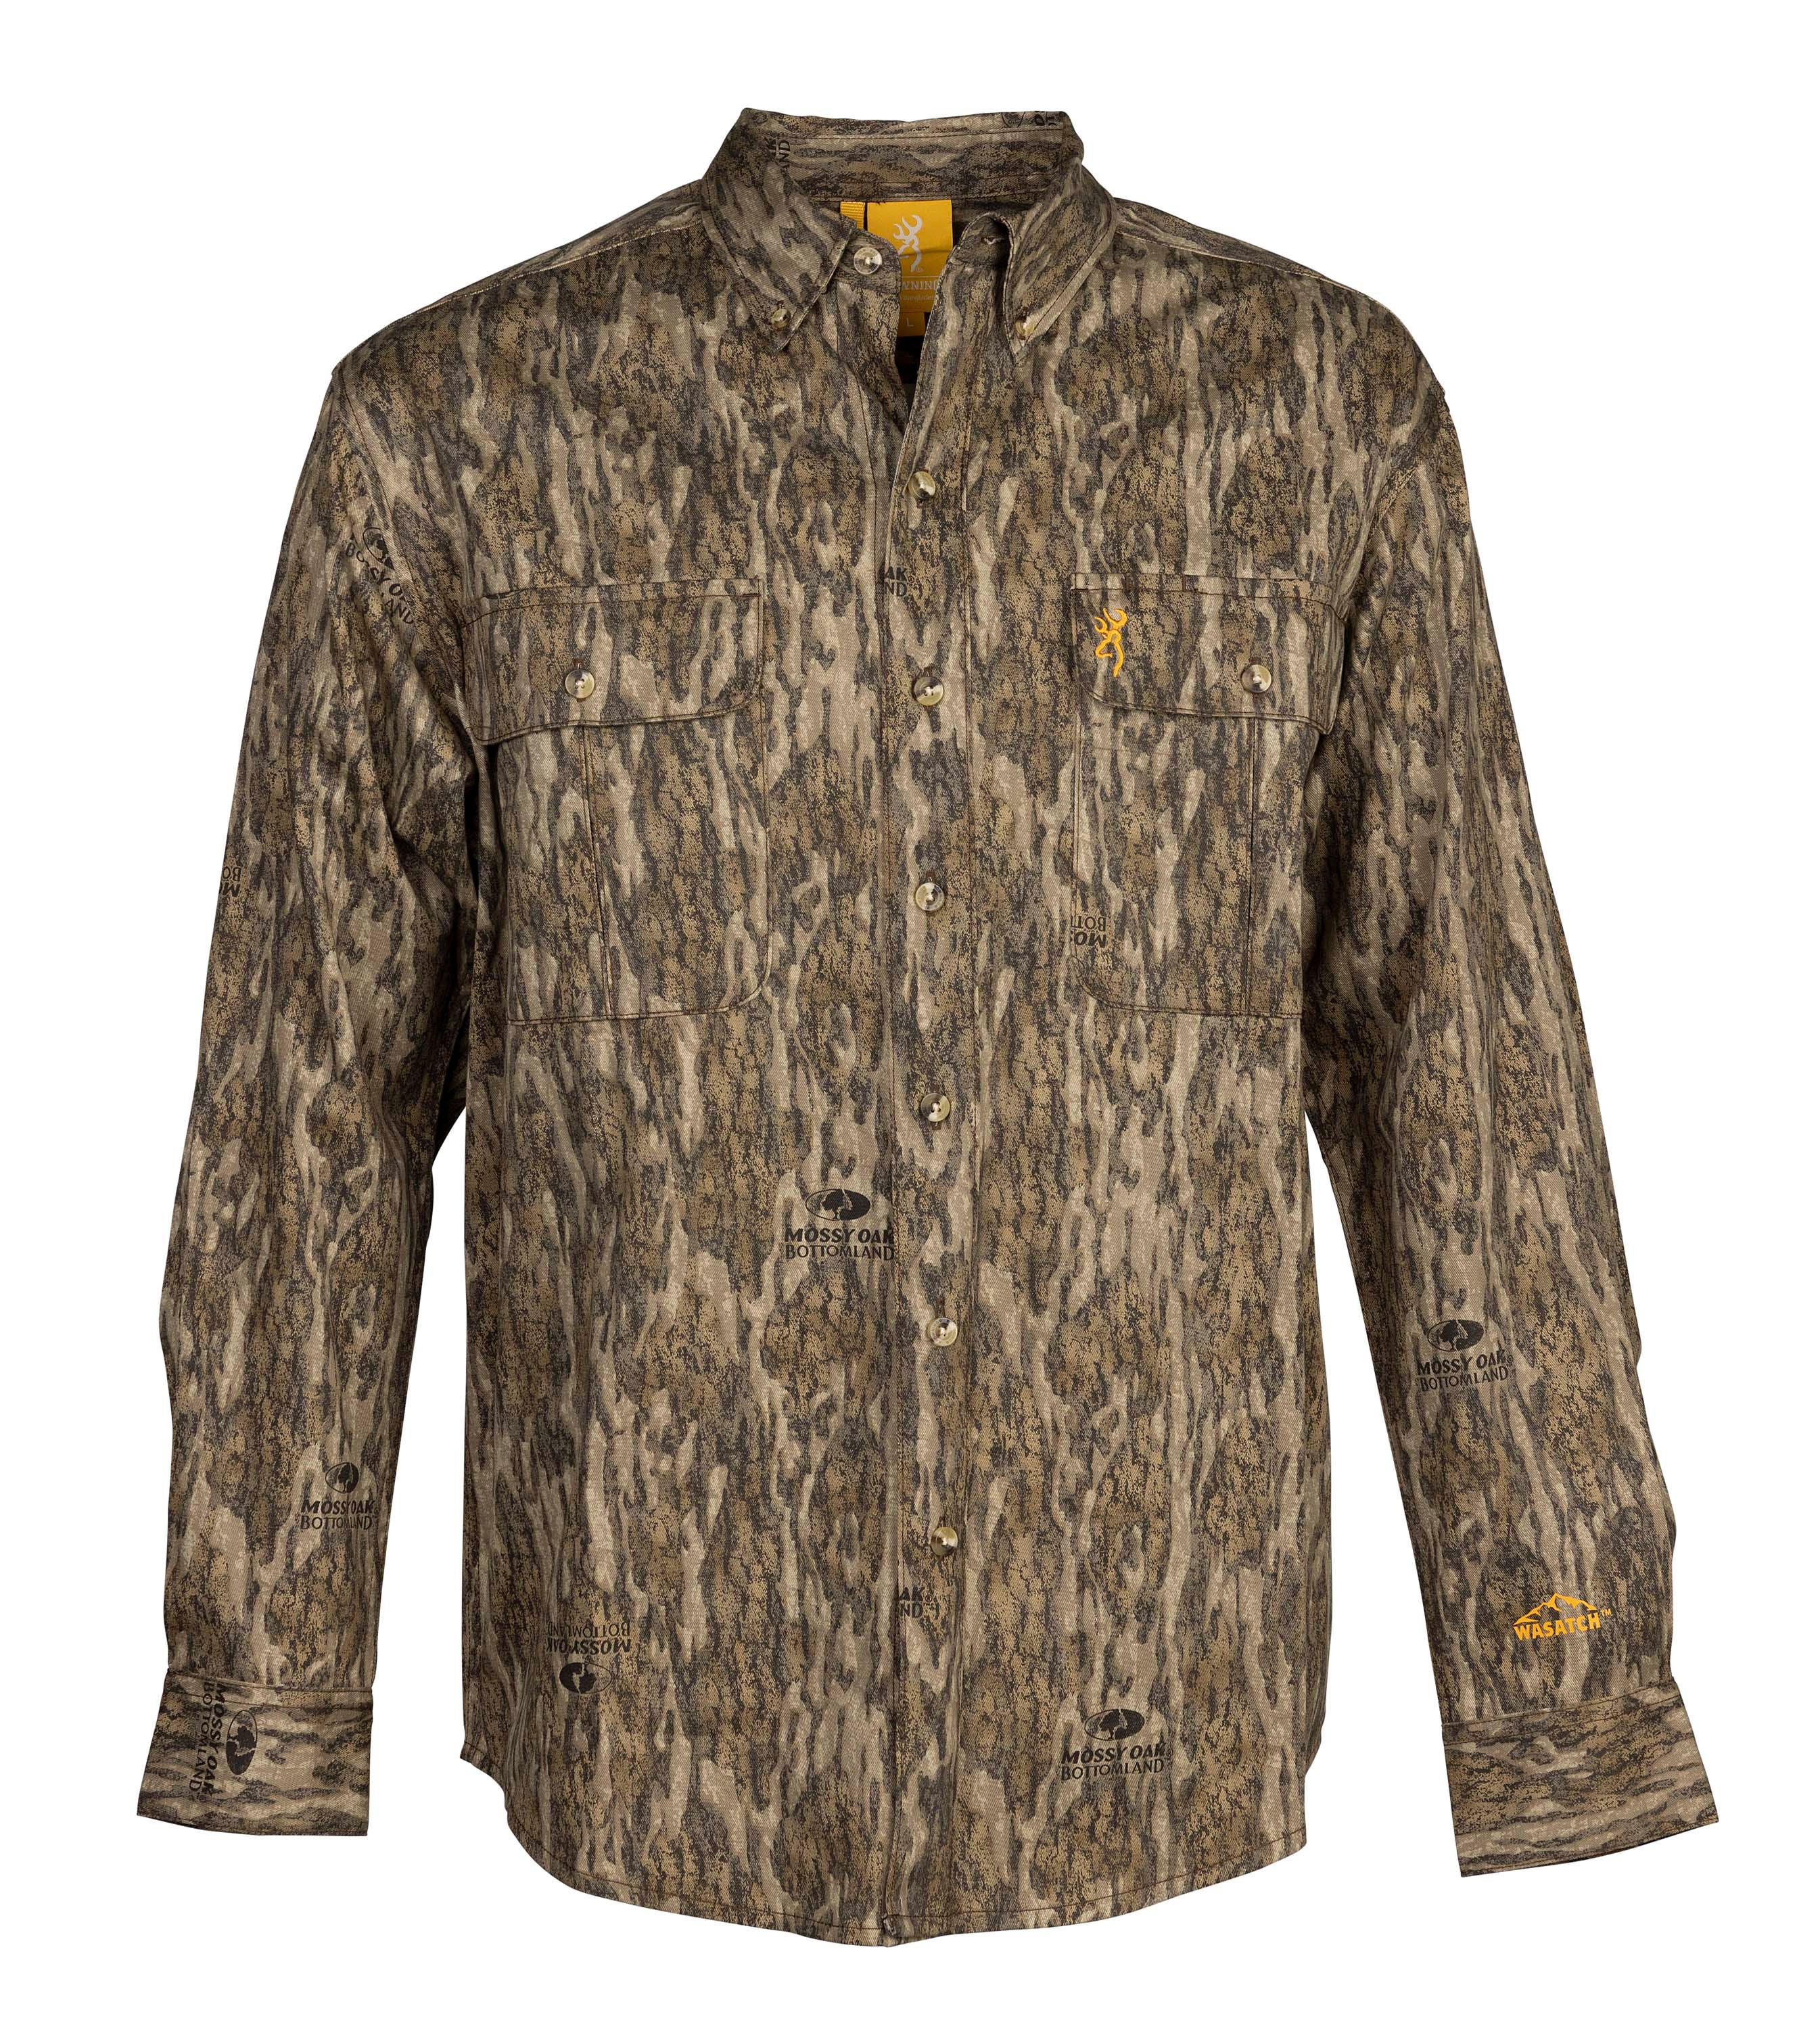 https://www.browning.com/content/dam/browning/product/clothing/2023/wasatch-cb-shirt/wasatch-cb-shirt-mobl-30178019-1.jpg